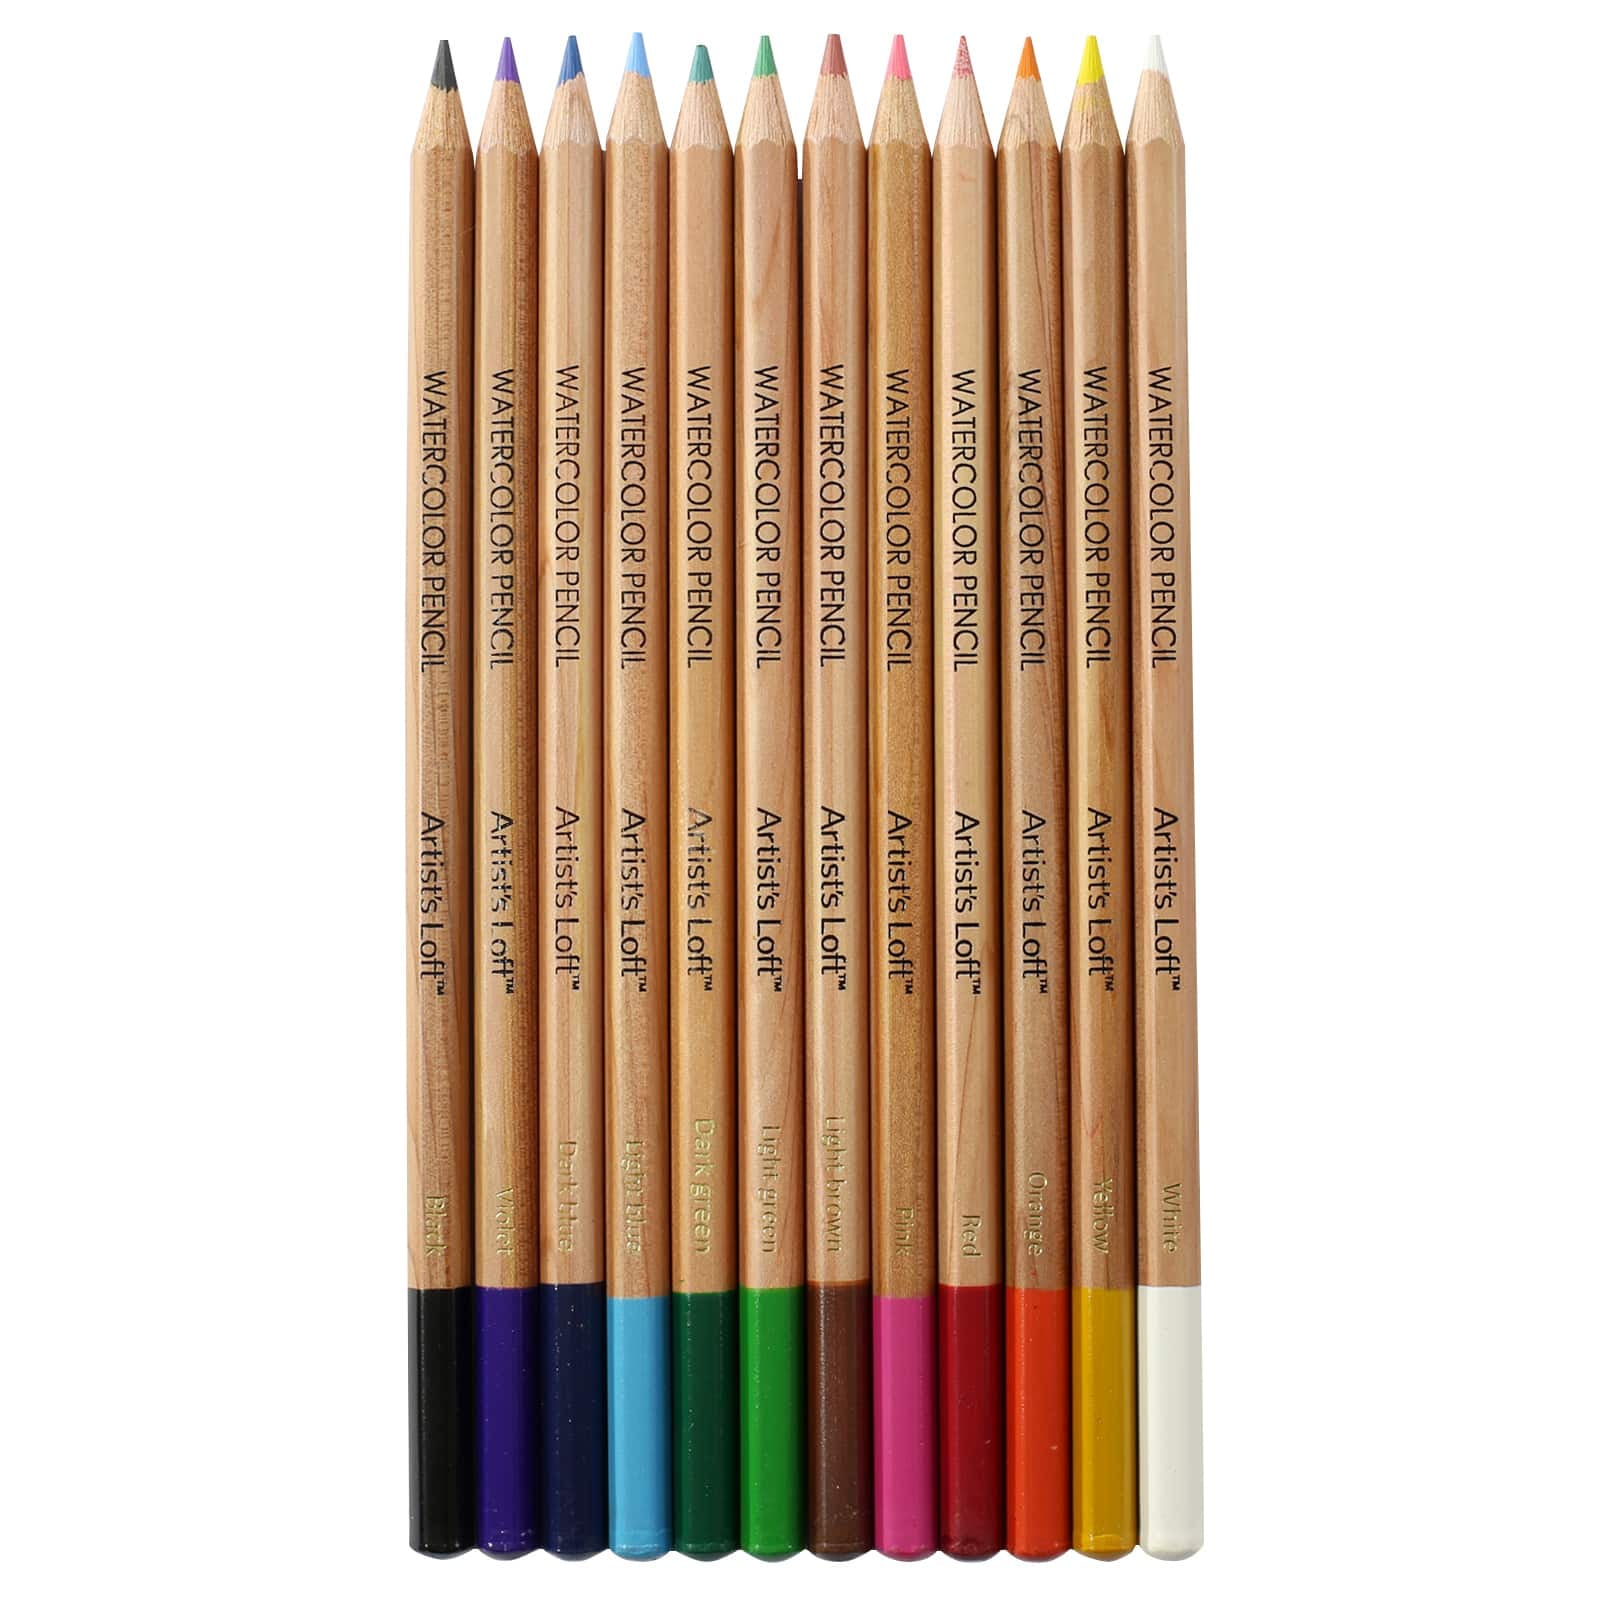 Bview Art Diverse Art Pencils Sketching Set For Beginners, Professional  Artists, Teens, And Adults Includes Watercolor Pencil Painting And Art  Supples 230706 From Mu007, $17.43